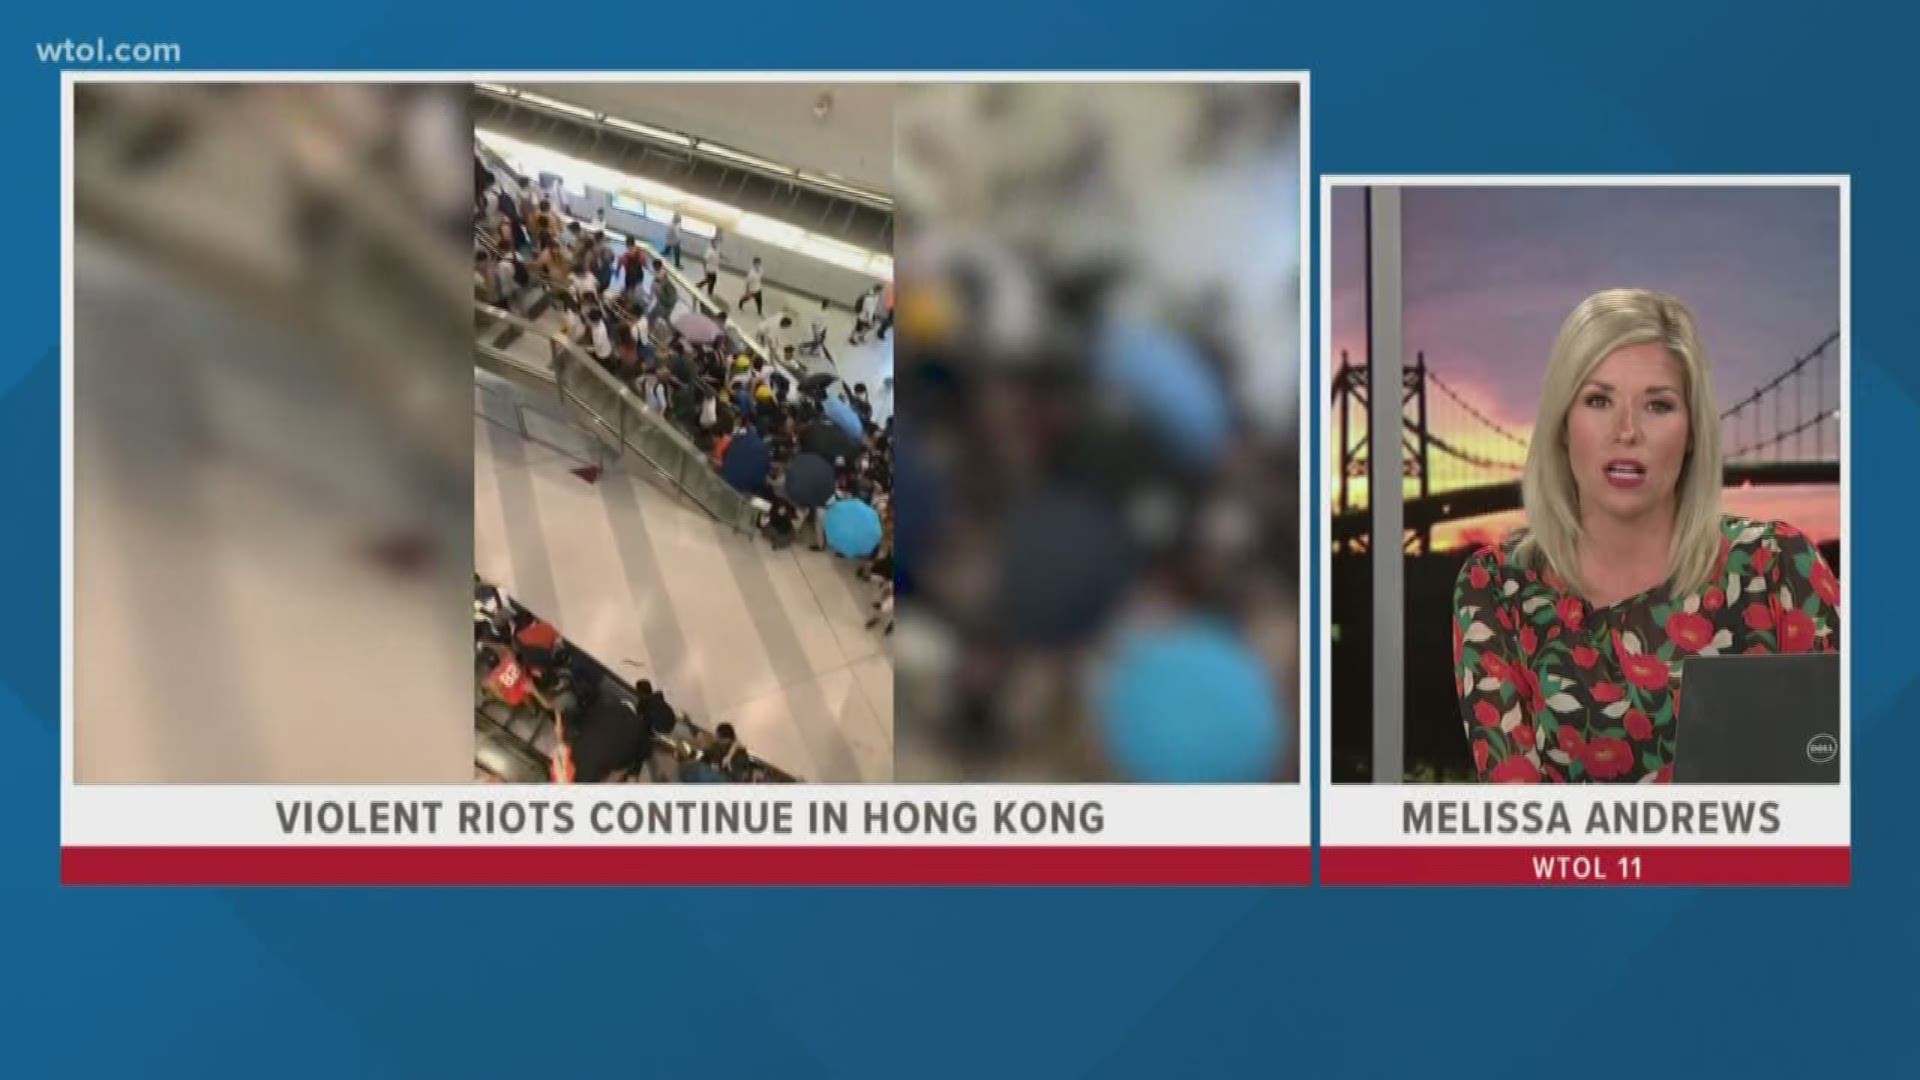 Authorities believe the attacks may stem from the on-going protests in the city.